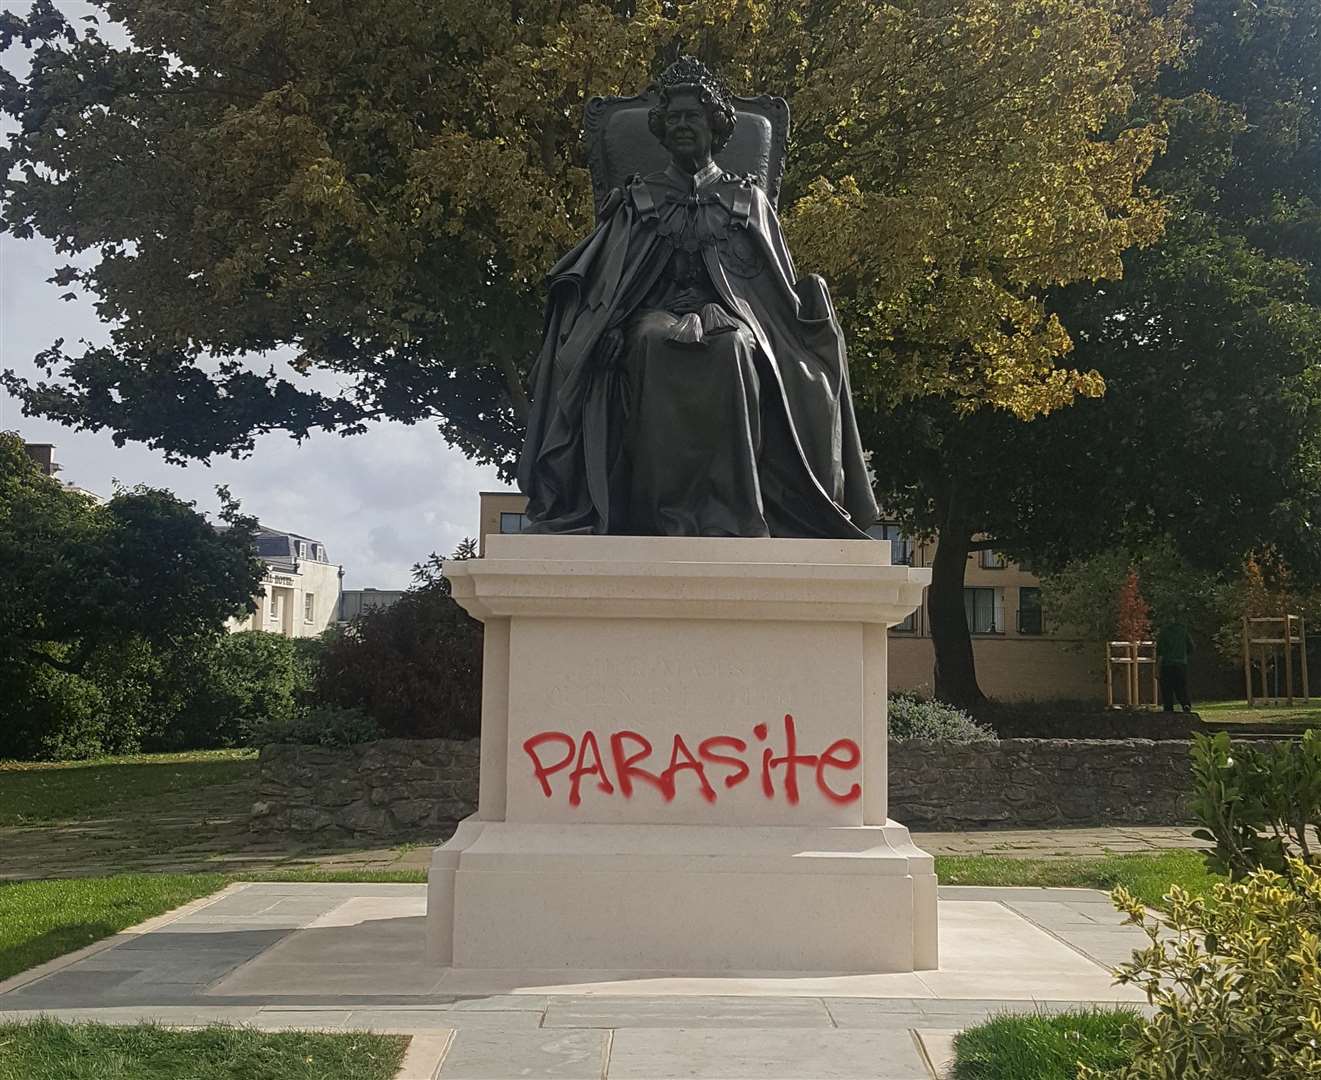 The word parasite was sprayed across the bottom of the statue. Picture: Craig Fenn